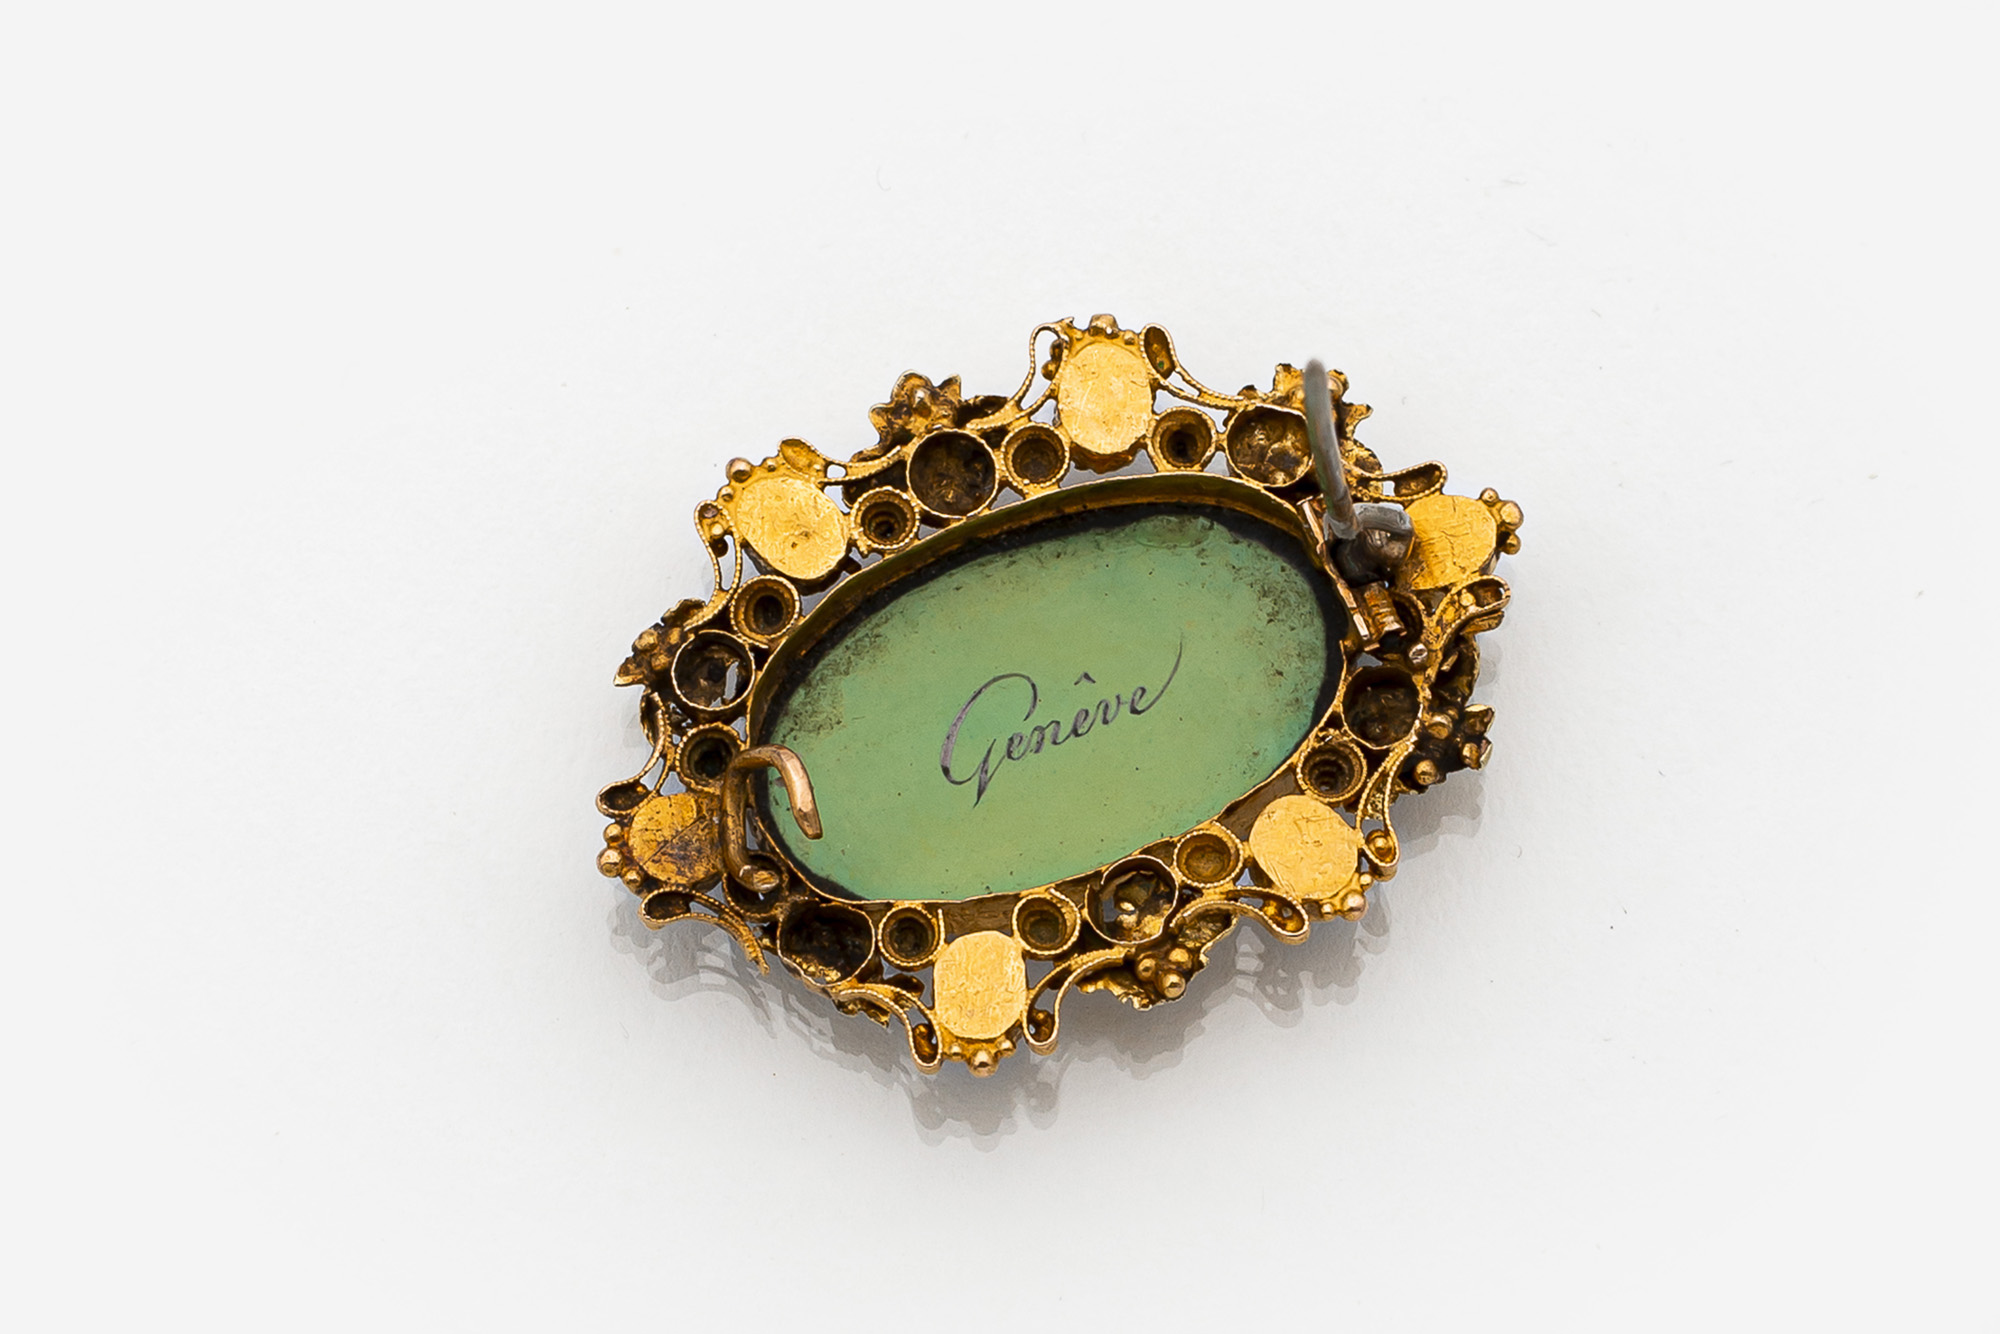 A SWISS ENAMELLED BROOCH WITH A GIRL FROM GENEVA - Image 2 of 2